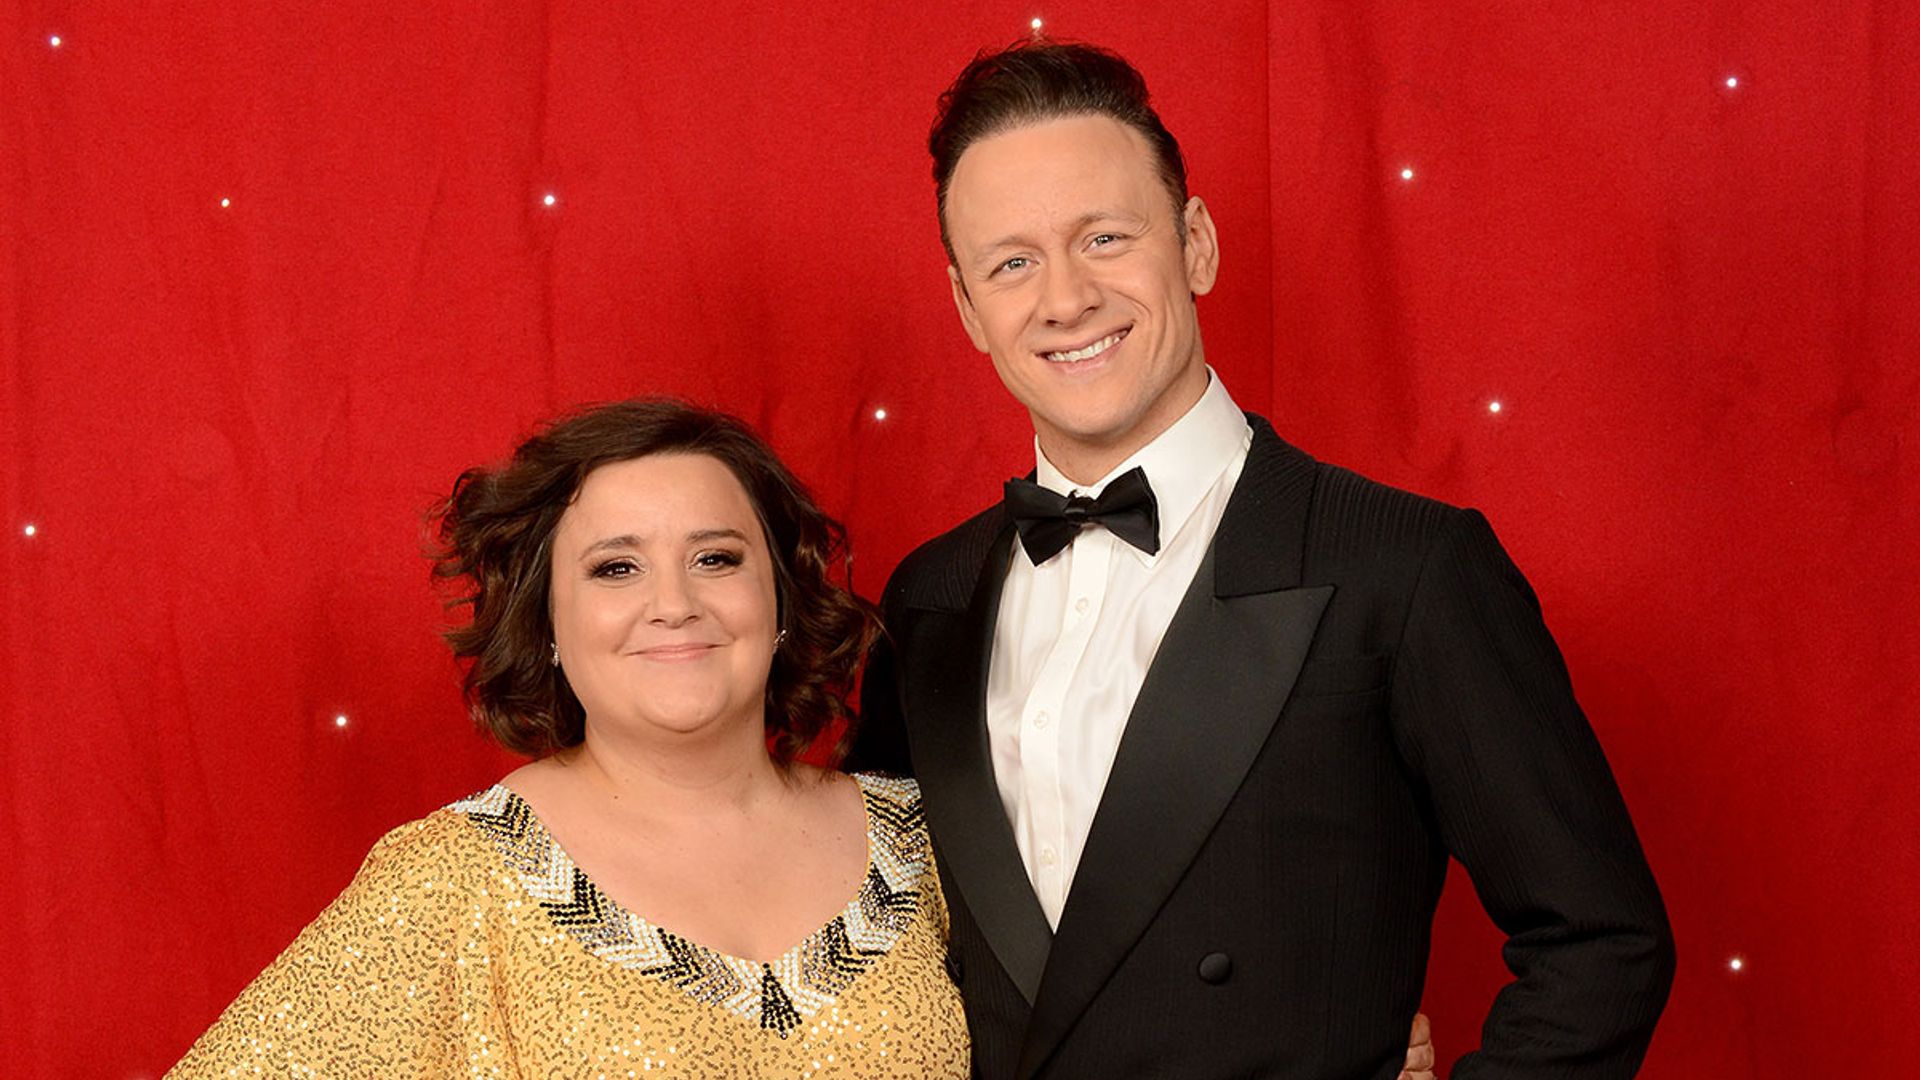 Strictly star Kevin Clifton reveals exciting TV plans with Susan Calman